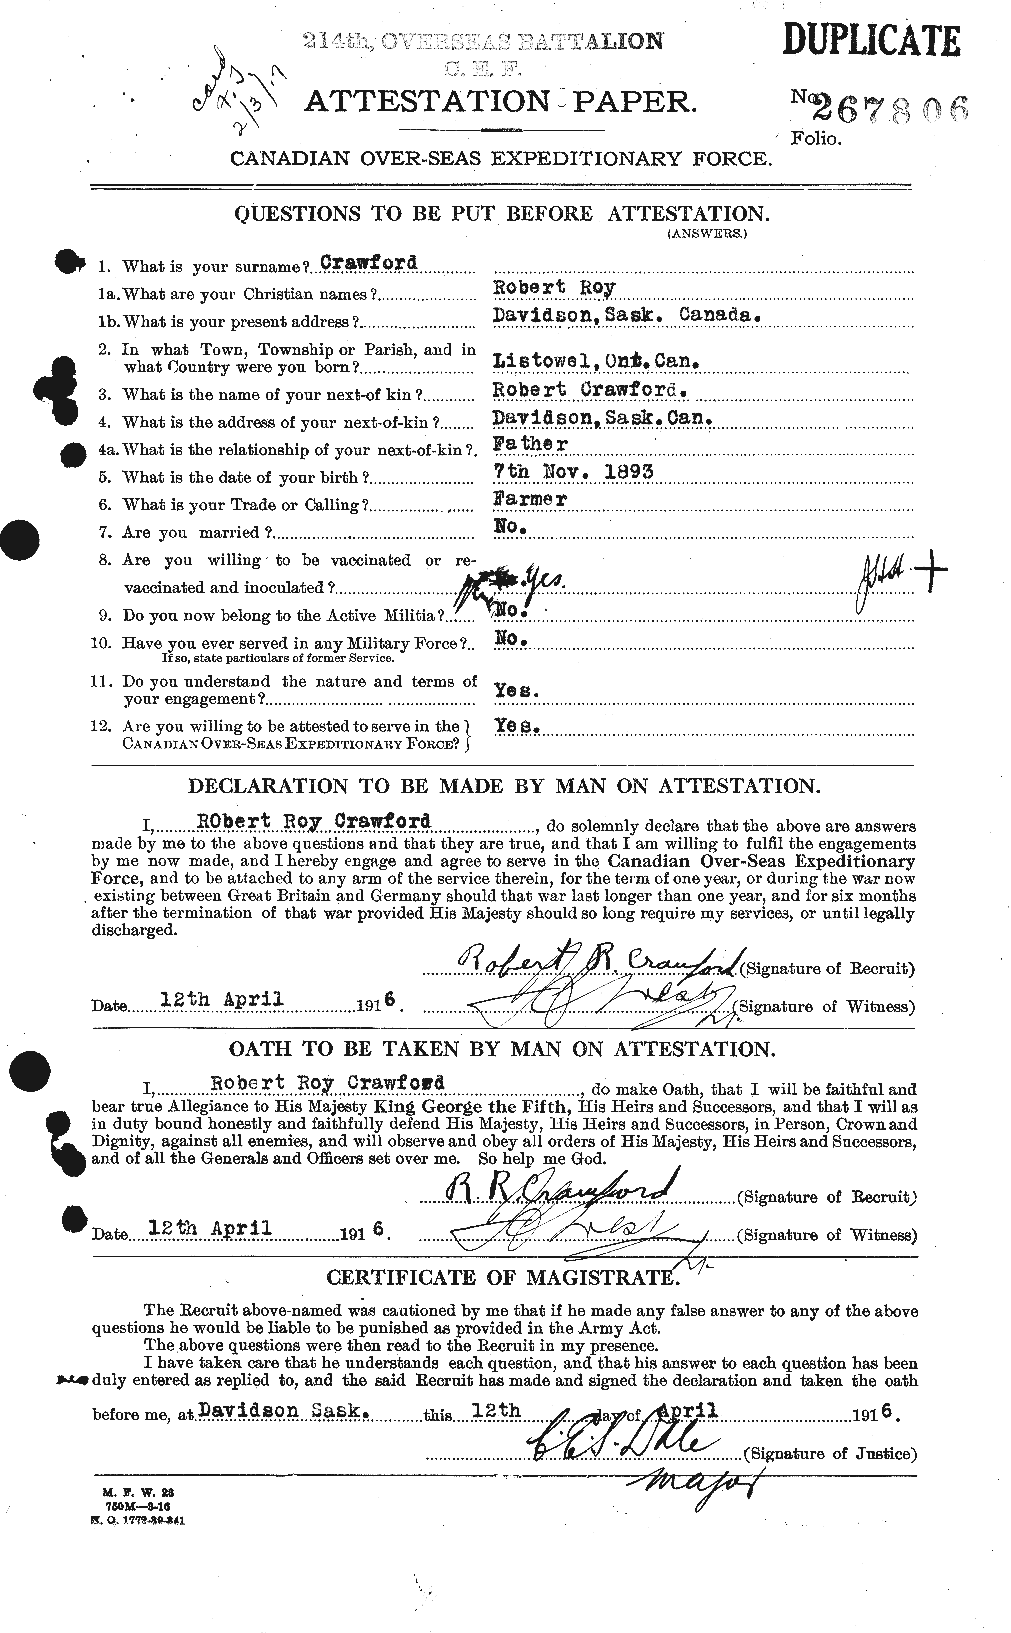 Personnel Records of the First World War - CEF 061395a